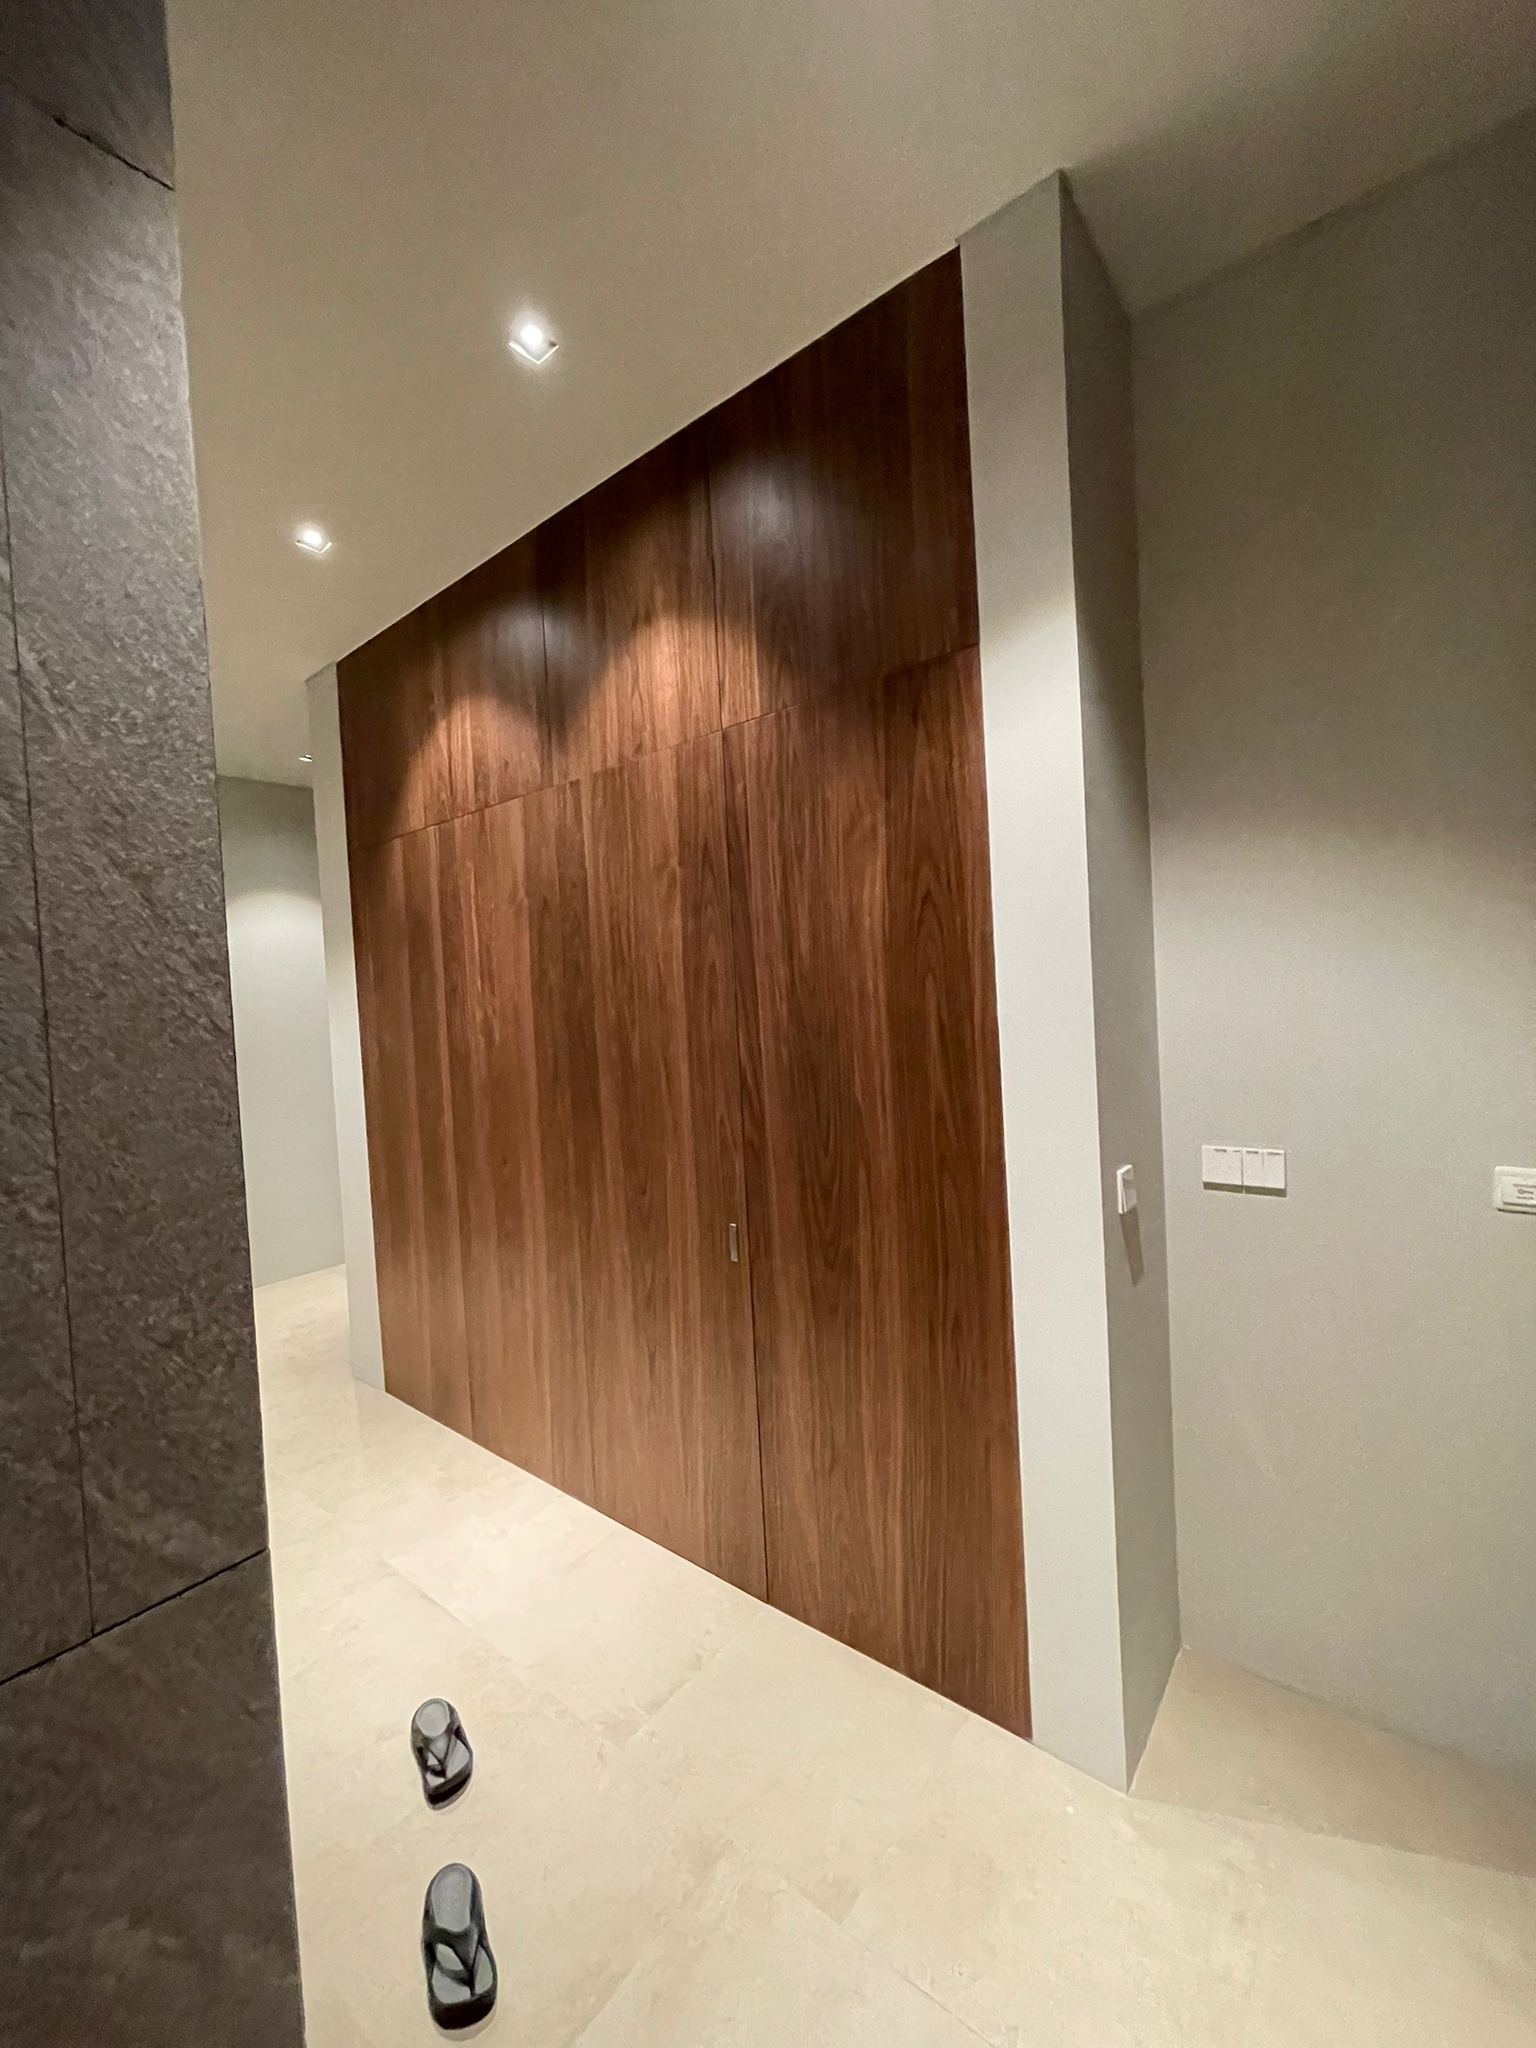 Custom Made Landed and Semi-D Entrance Doors Enhancing Security, Style and Soundproofing in Singapore Homes (3)